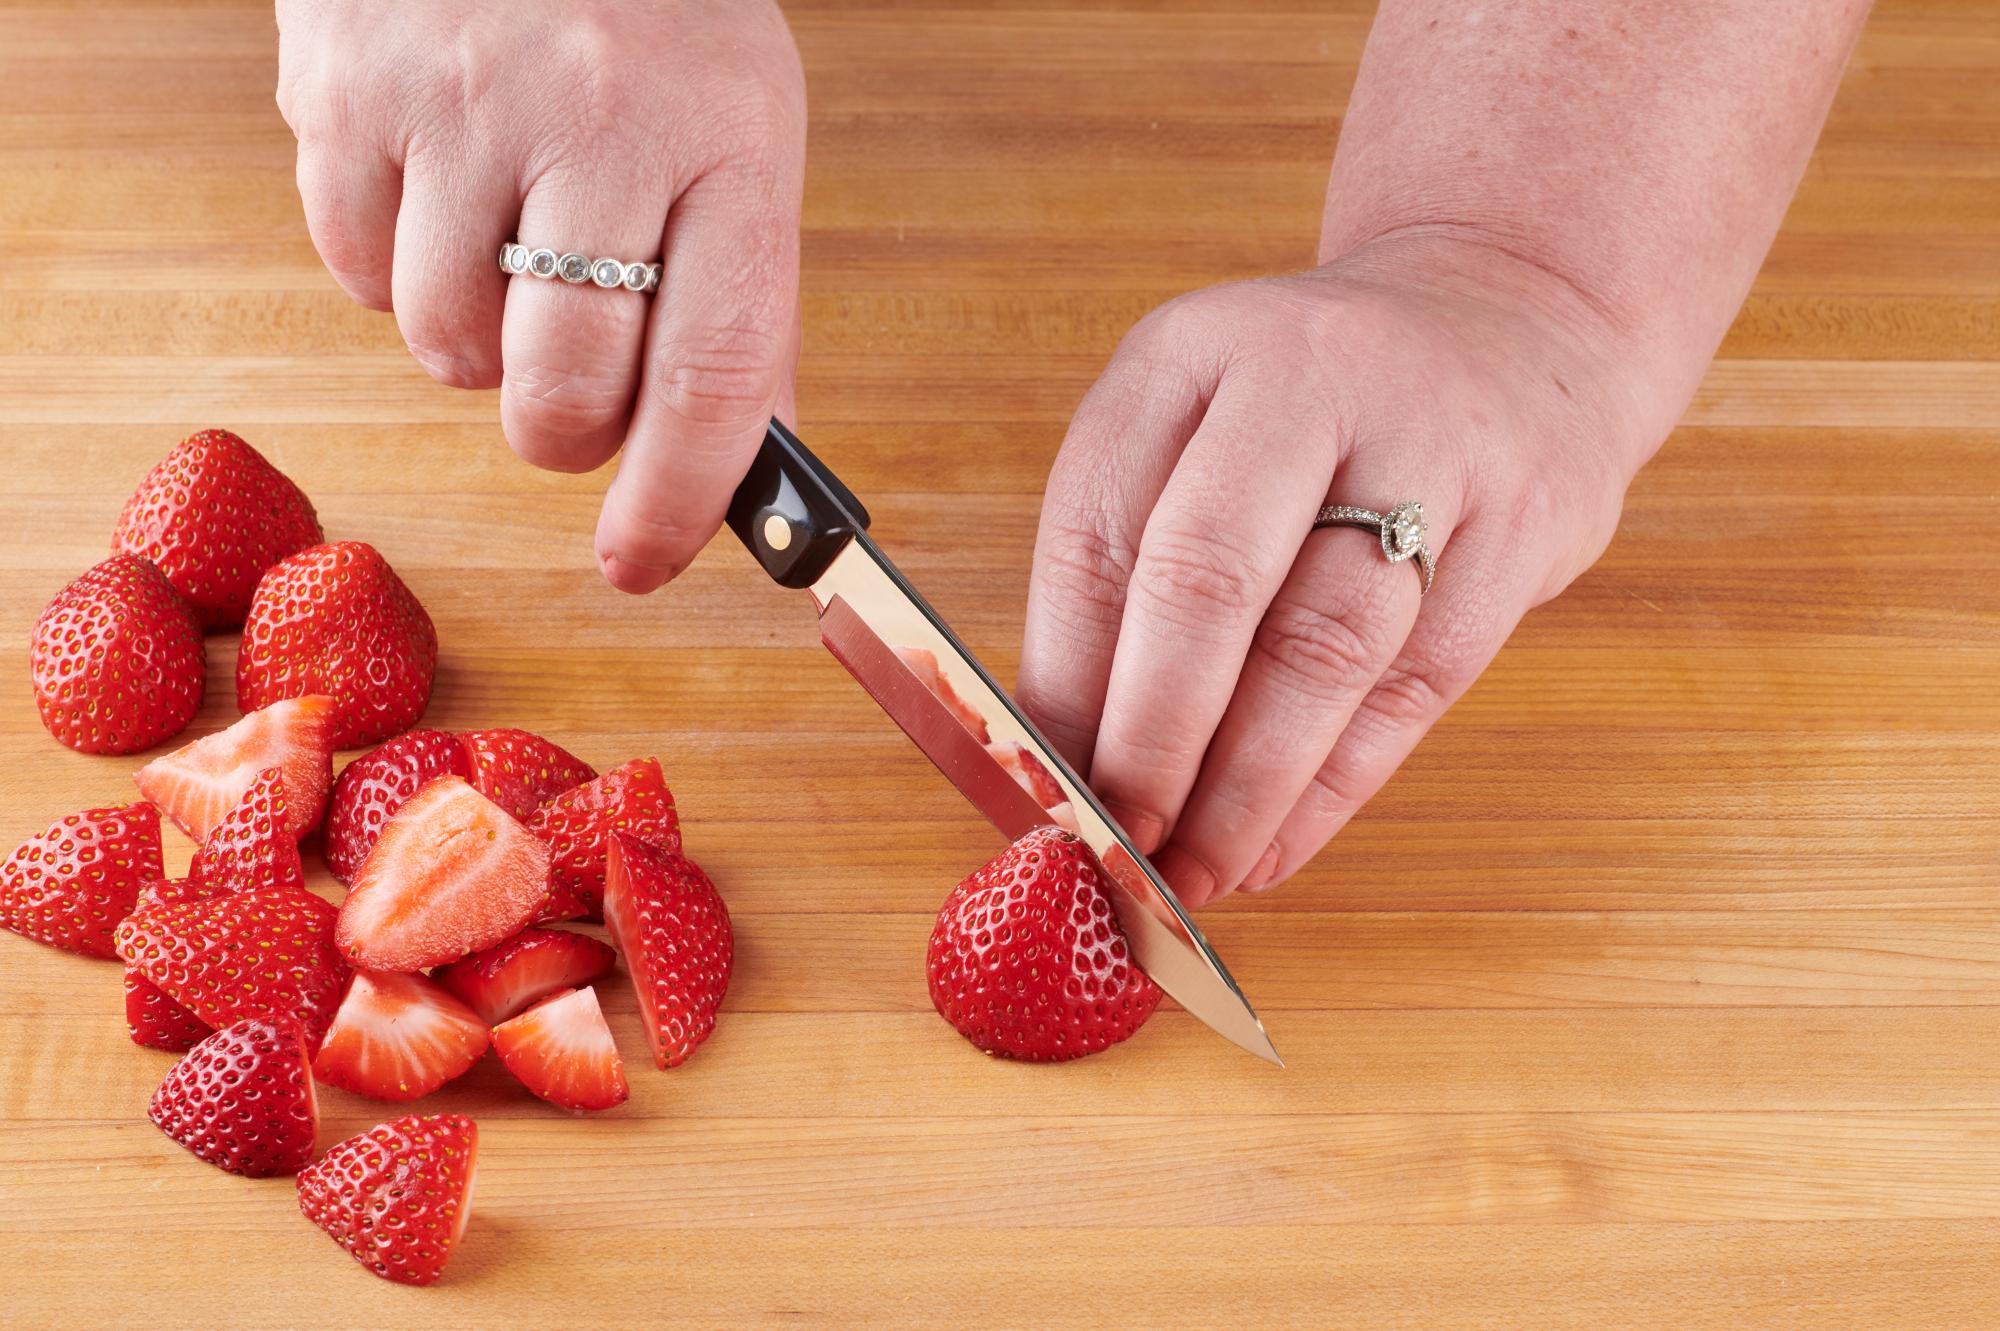 Slicing strawberries with a 4 Inch Paring Knife.